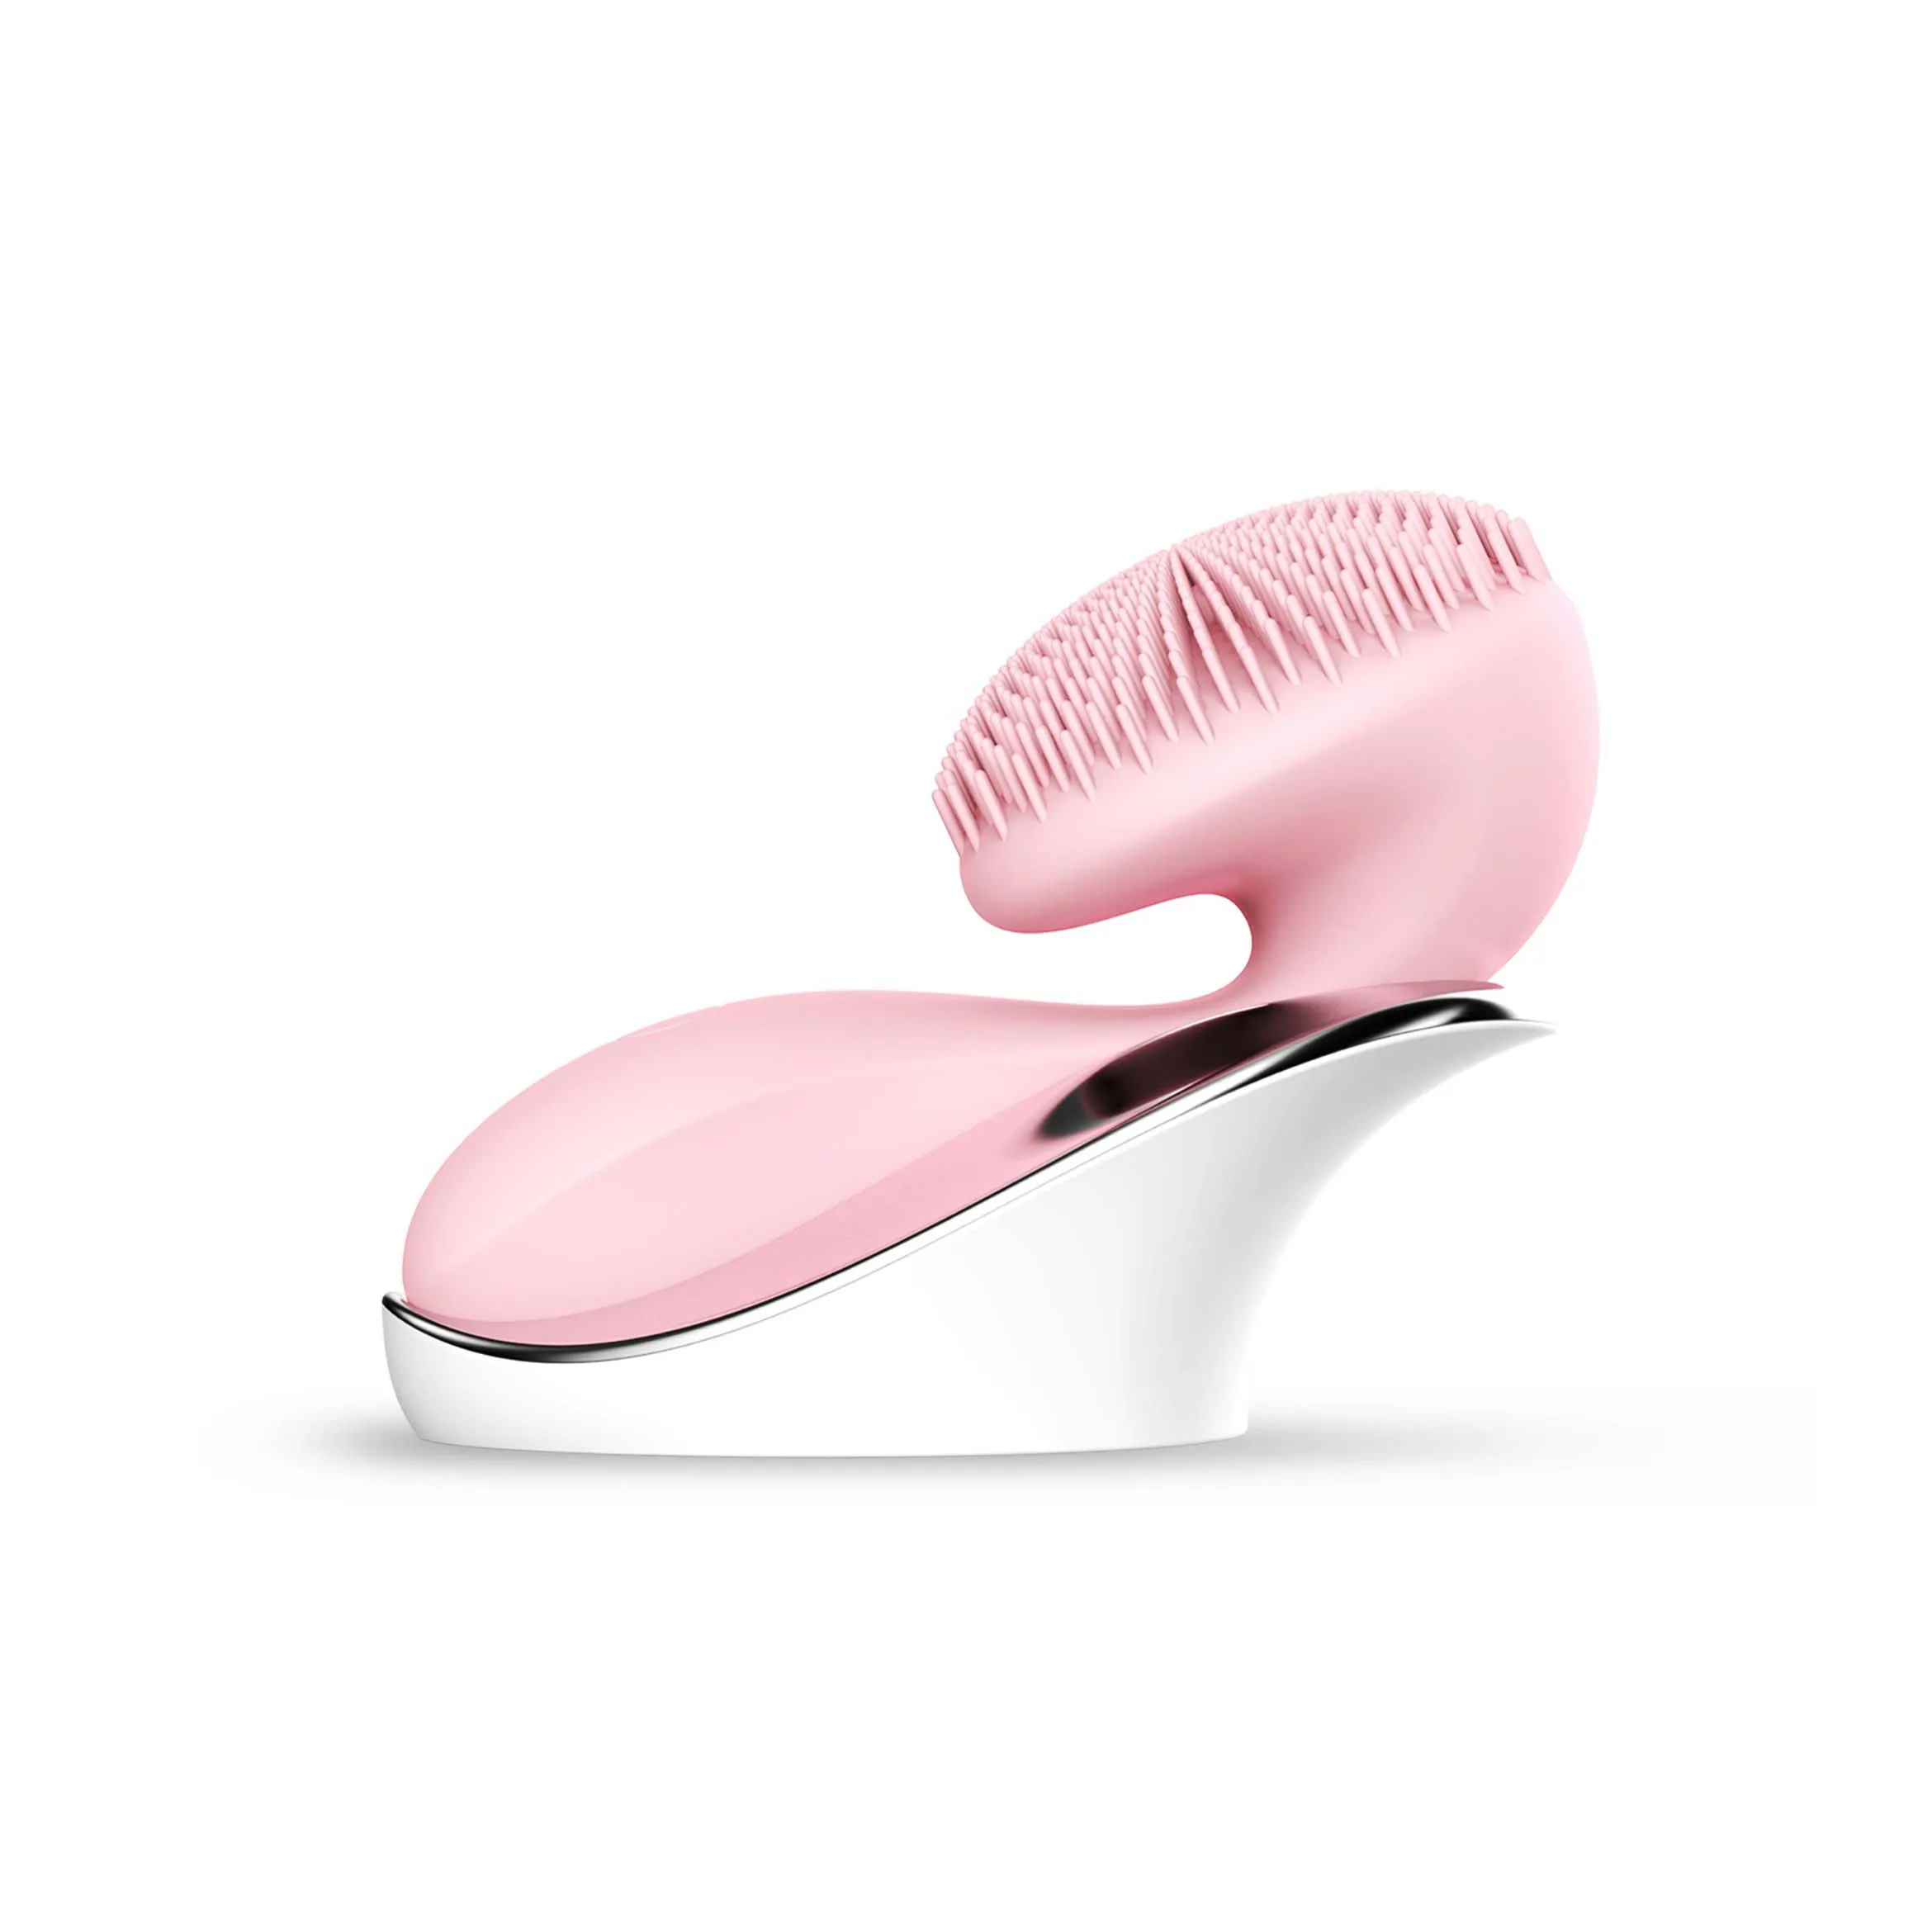 

Iksbeauty 2021 new products pore cleaner deep cleansing ems vibration silicone face brush facial cleansing brush, Pink/white/customization